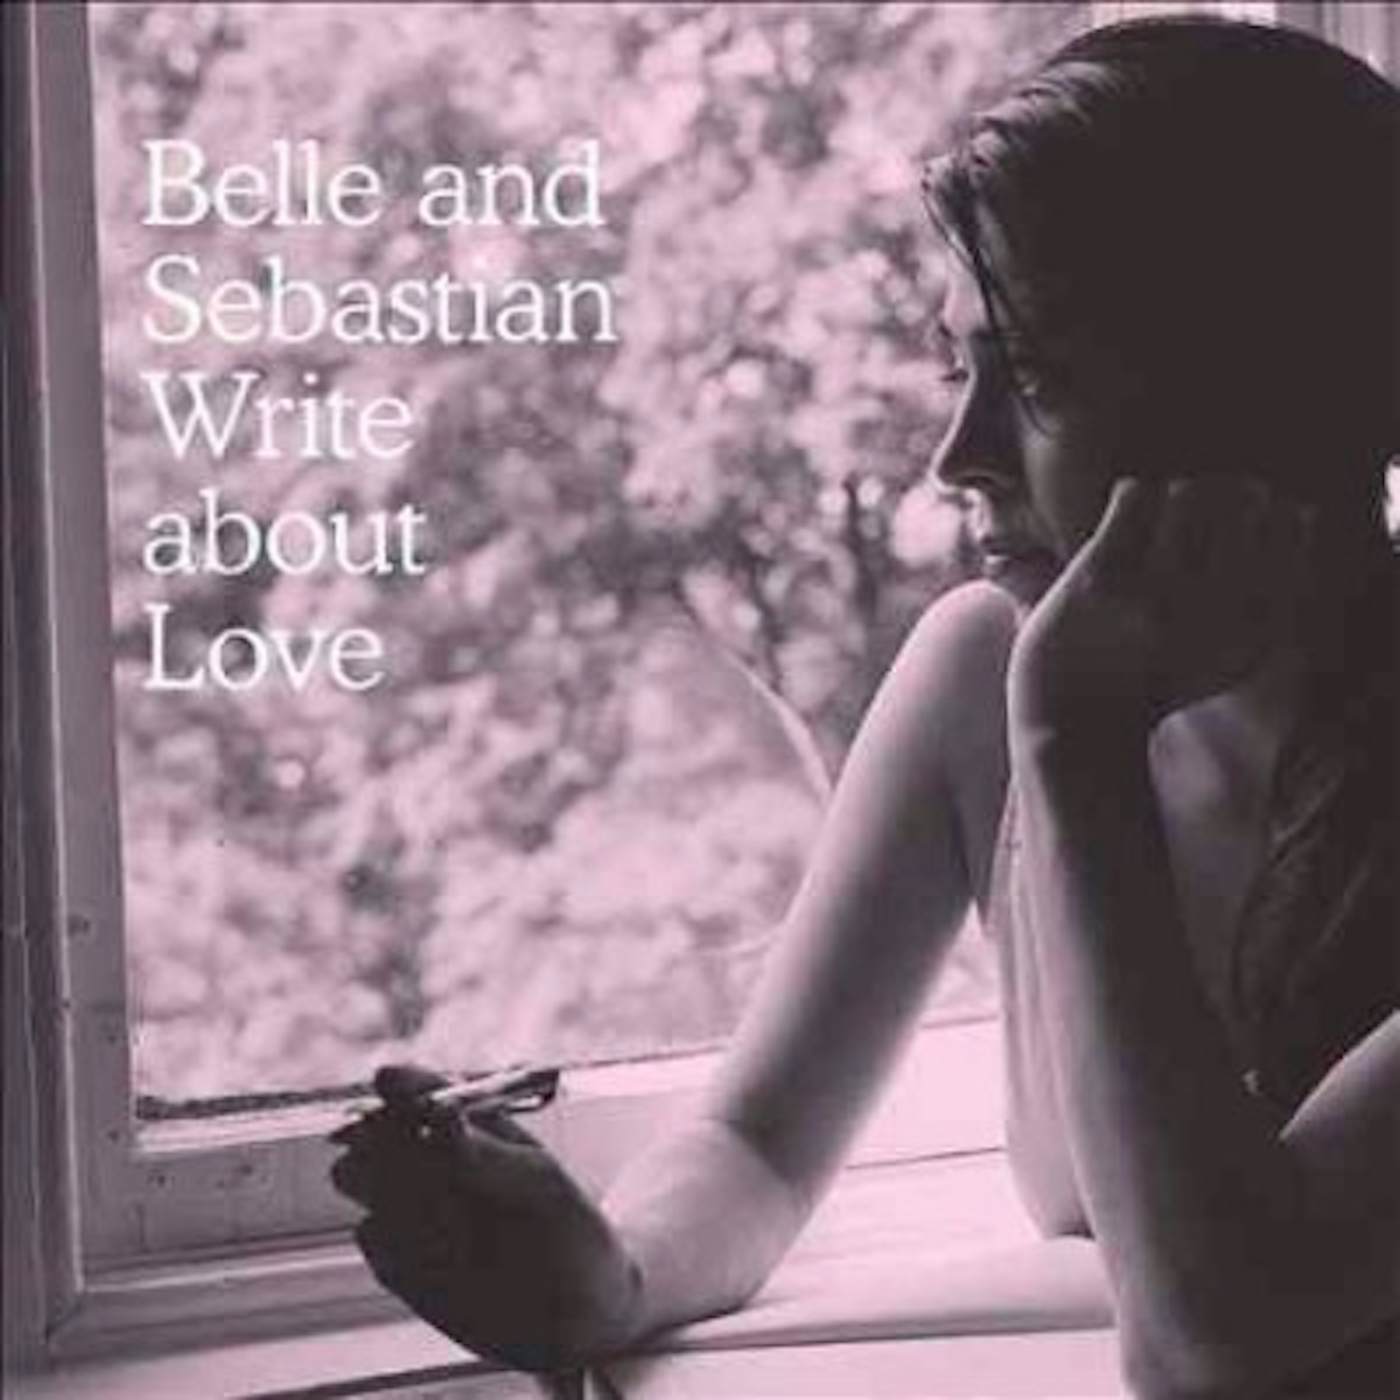 Belle and Sebastian Write About Love Vinyl Record